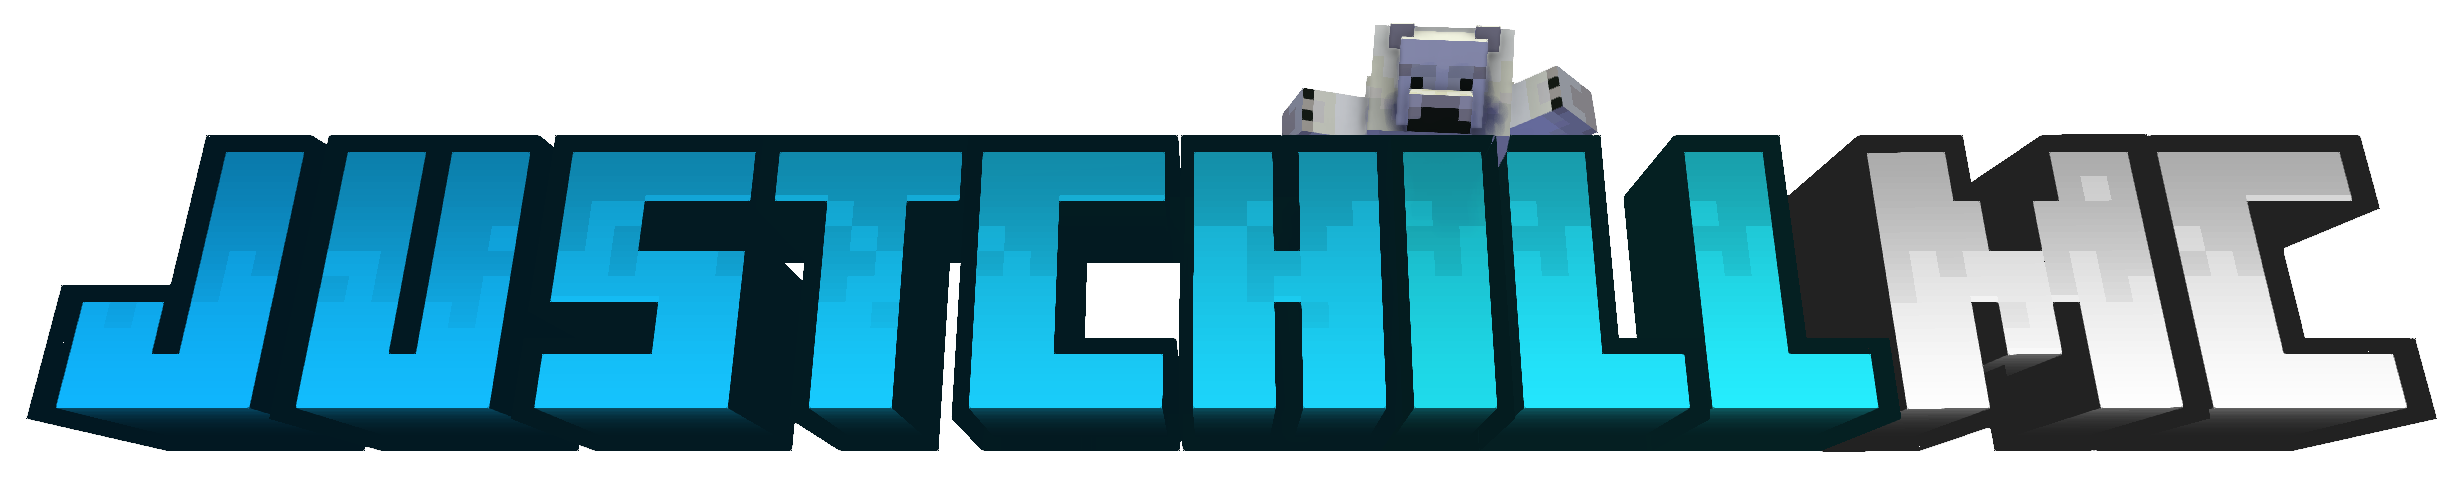 JustChillMC ✅1.19 ✅Semi-Vanilla SMP ✅Relaxing and Friendly Survival ✅ Anti-Grief ✅Economy Minecraft Server